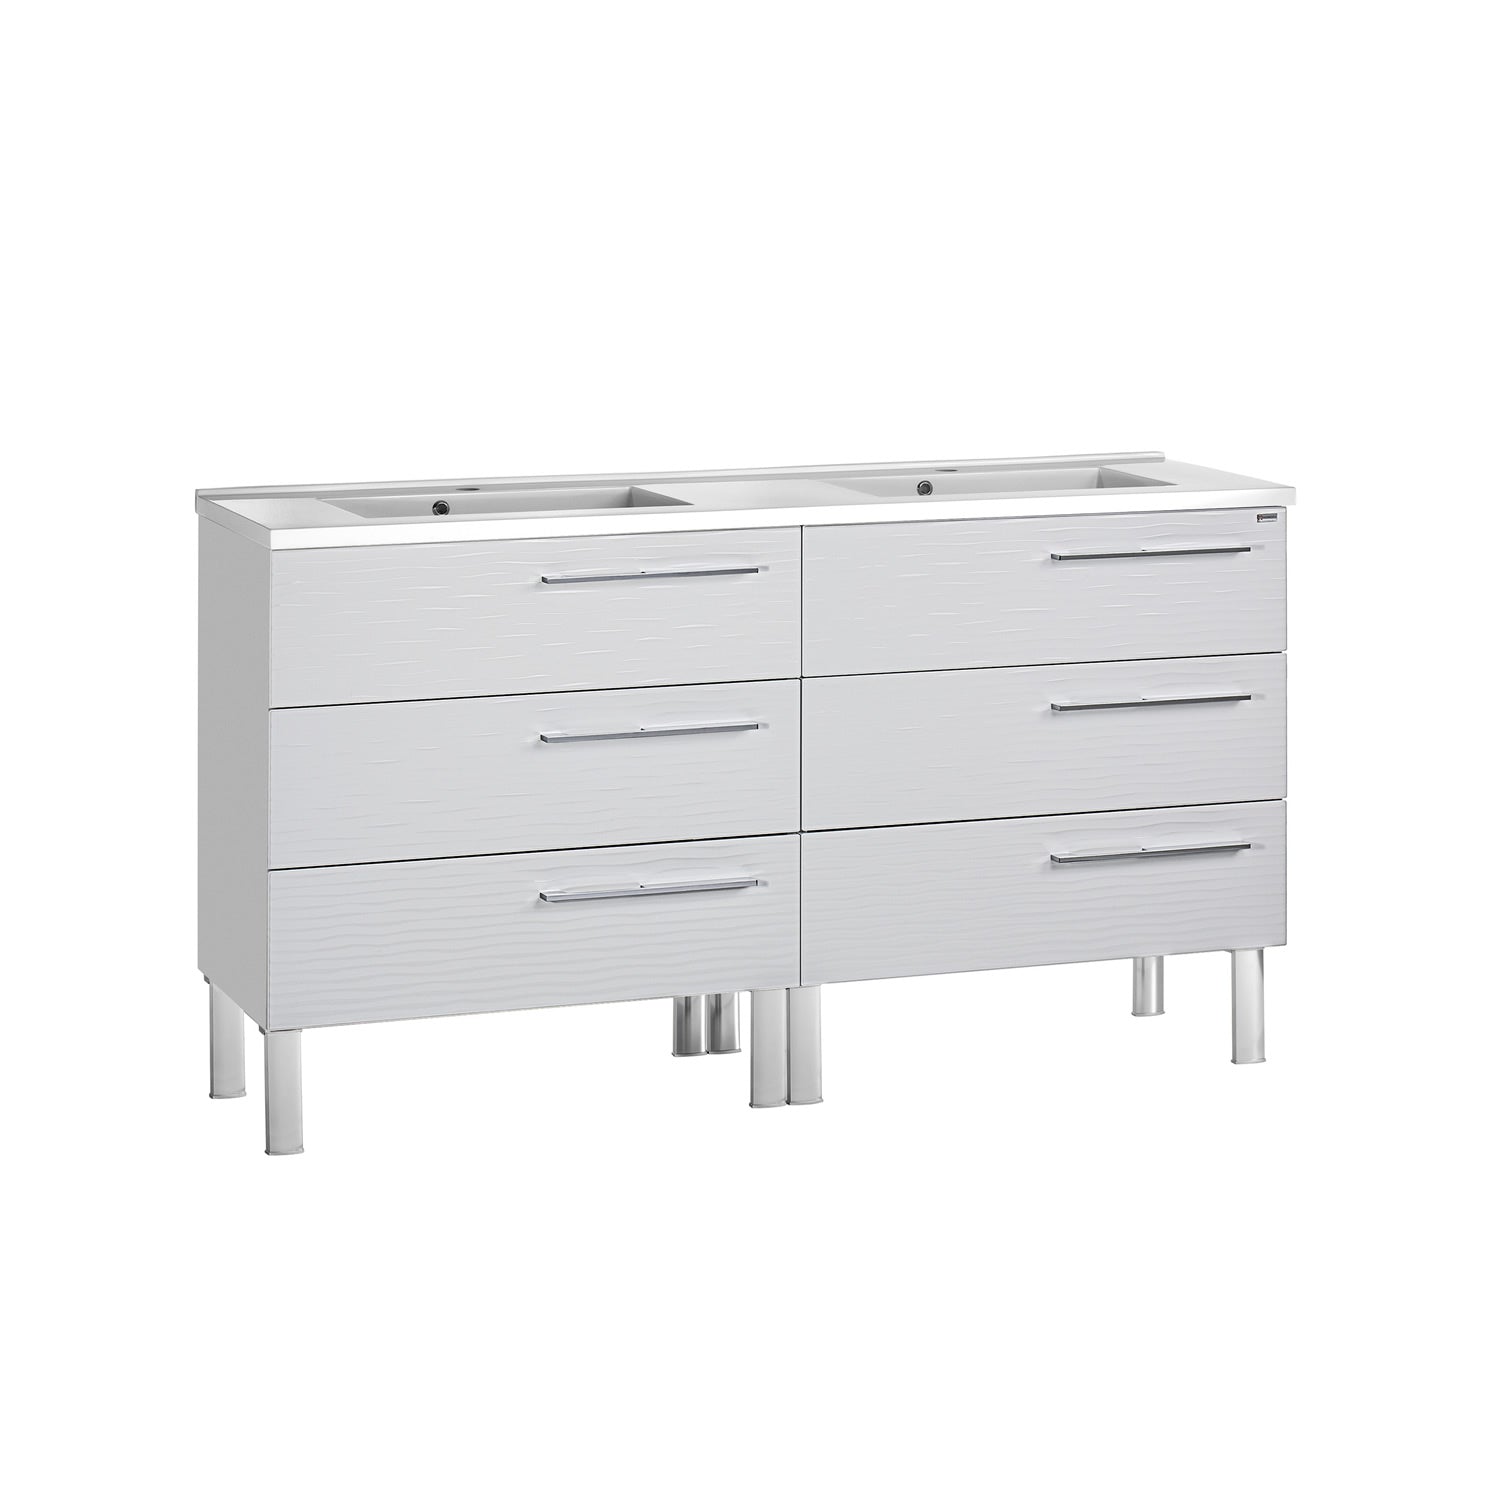 56" Double Vanity, Floor Mount, 6 Drawers with Soft Close, White, Serie Dune by VALENZUELA